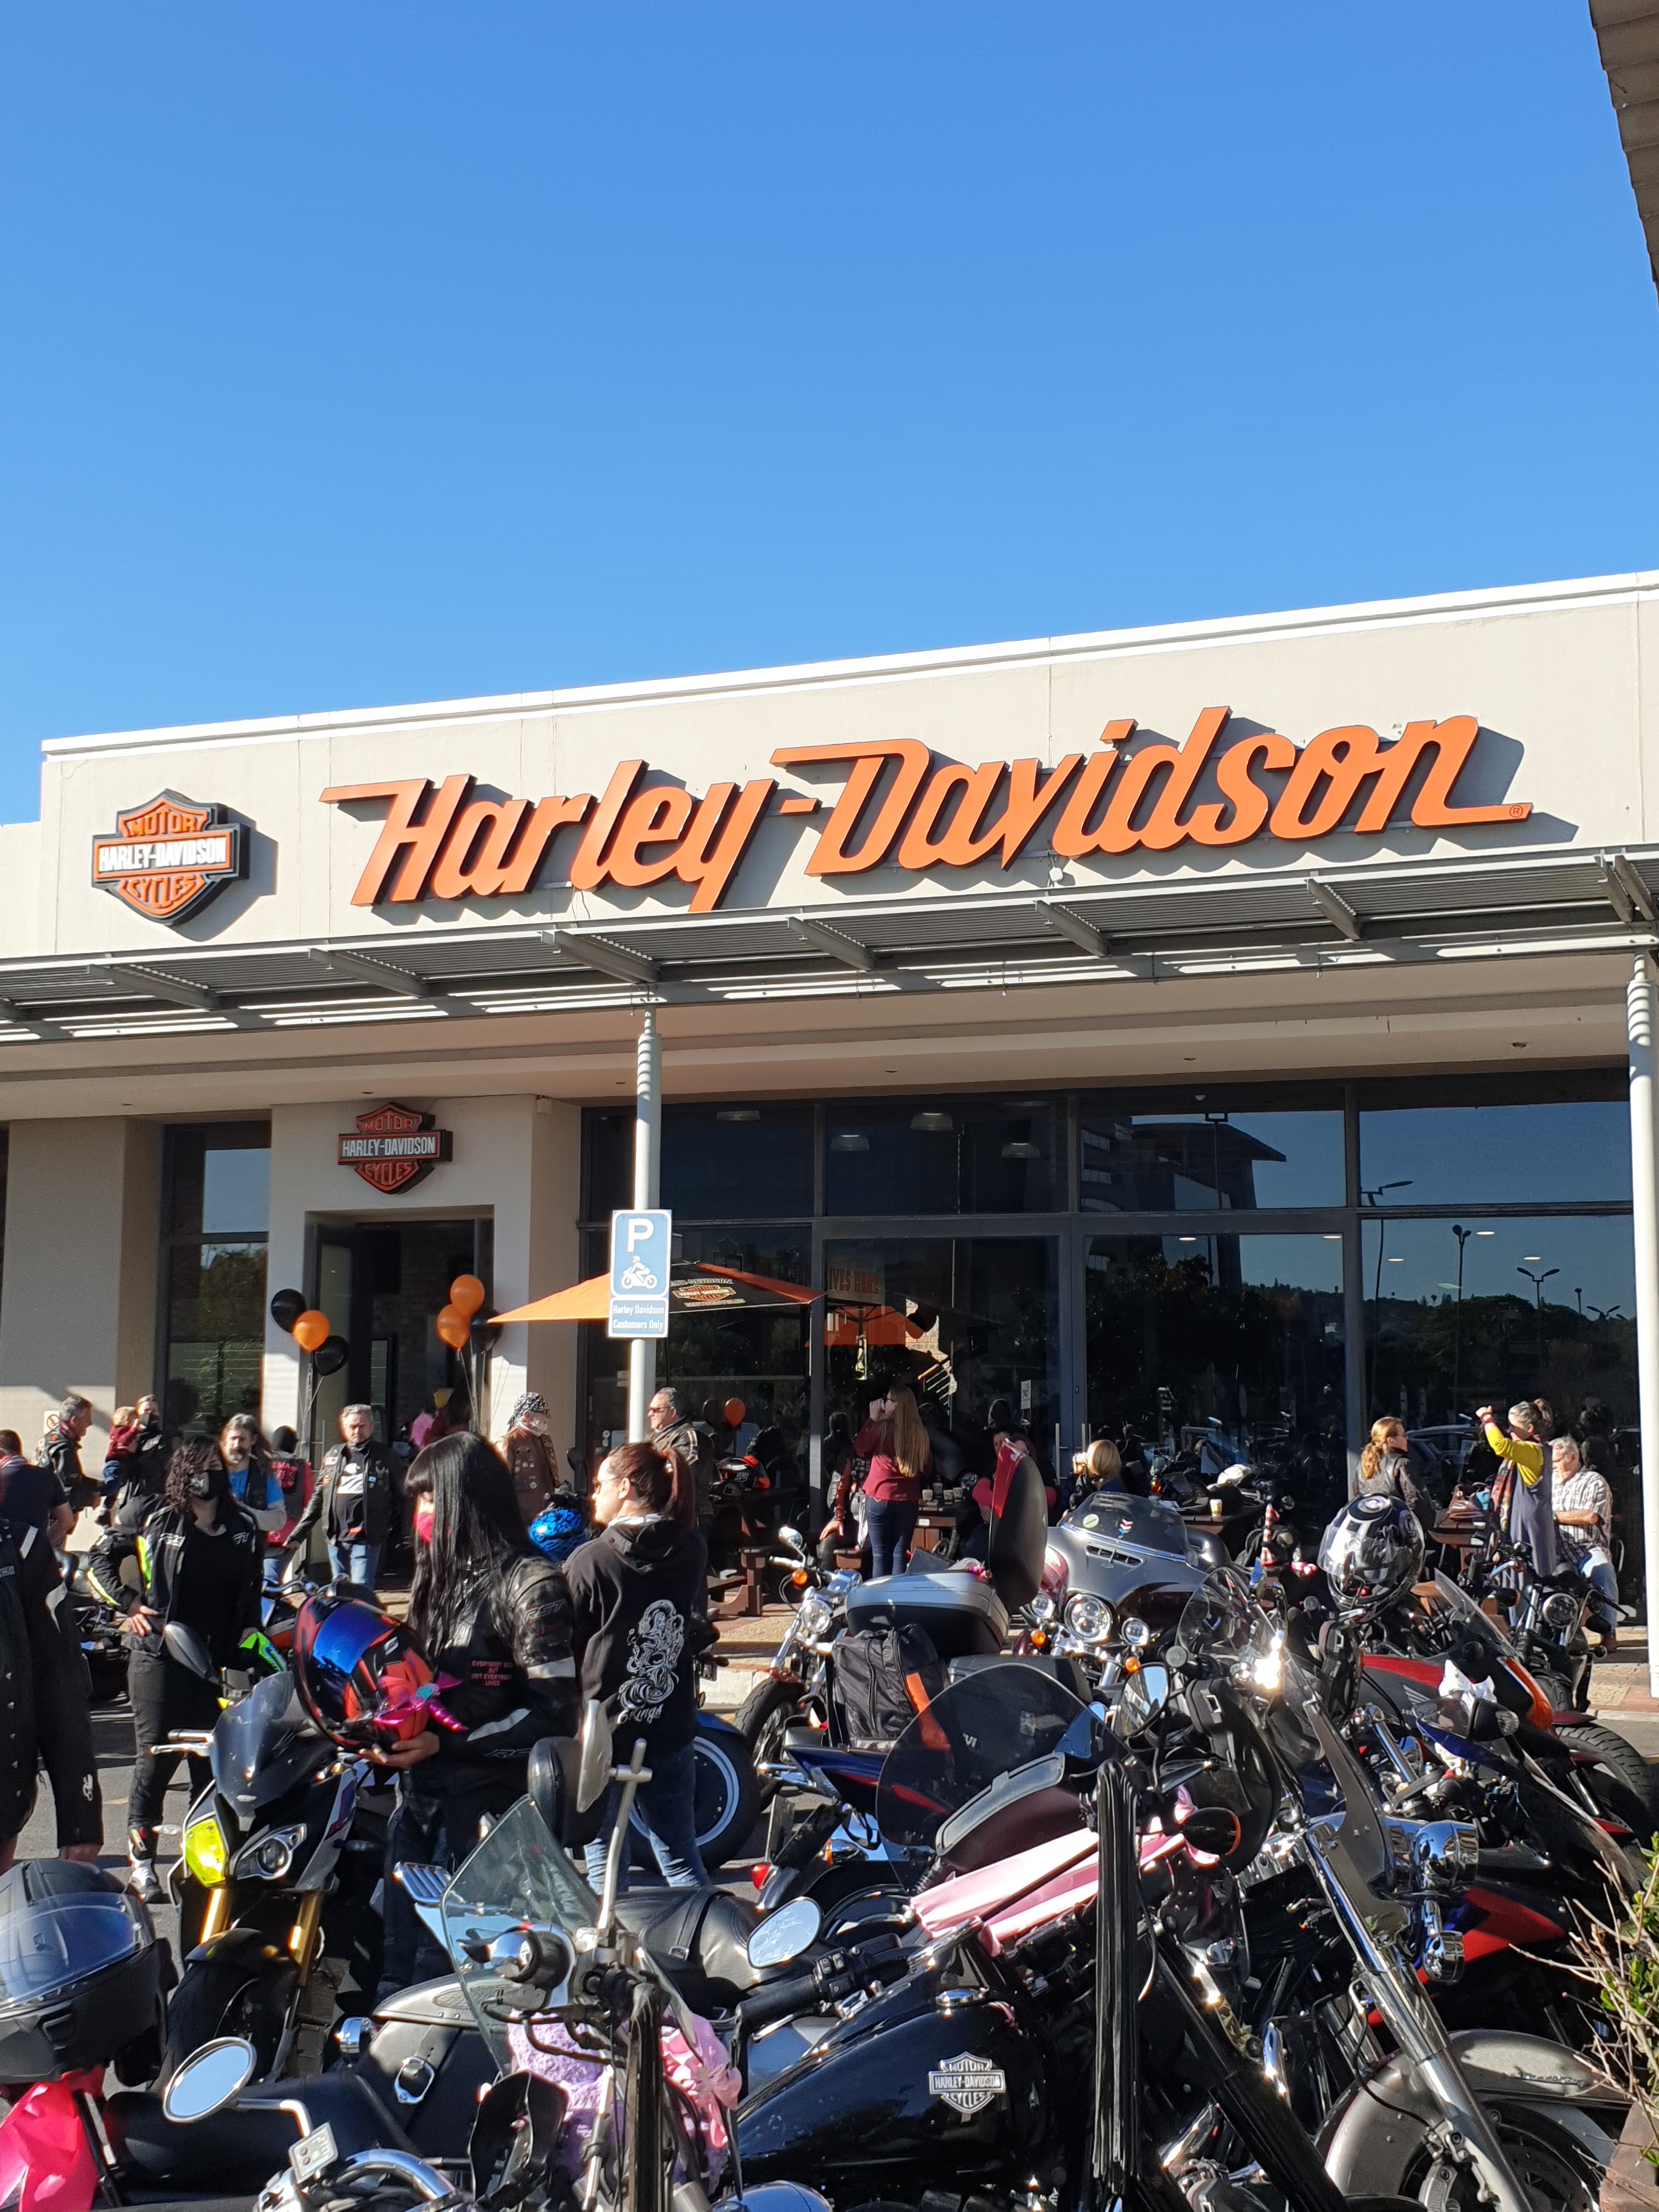 A visit from Harley DAVIDSON Cape Town 24/08/12 - wine.co.za